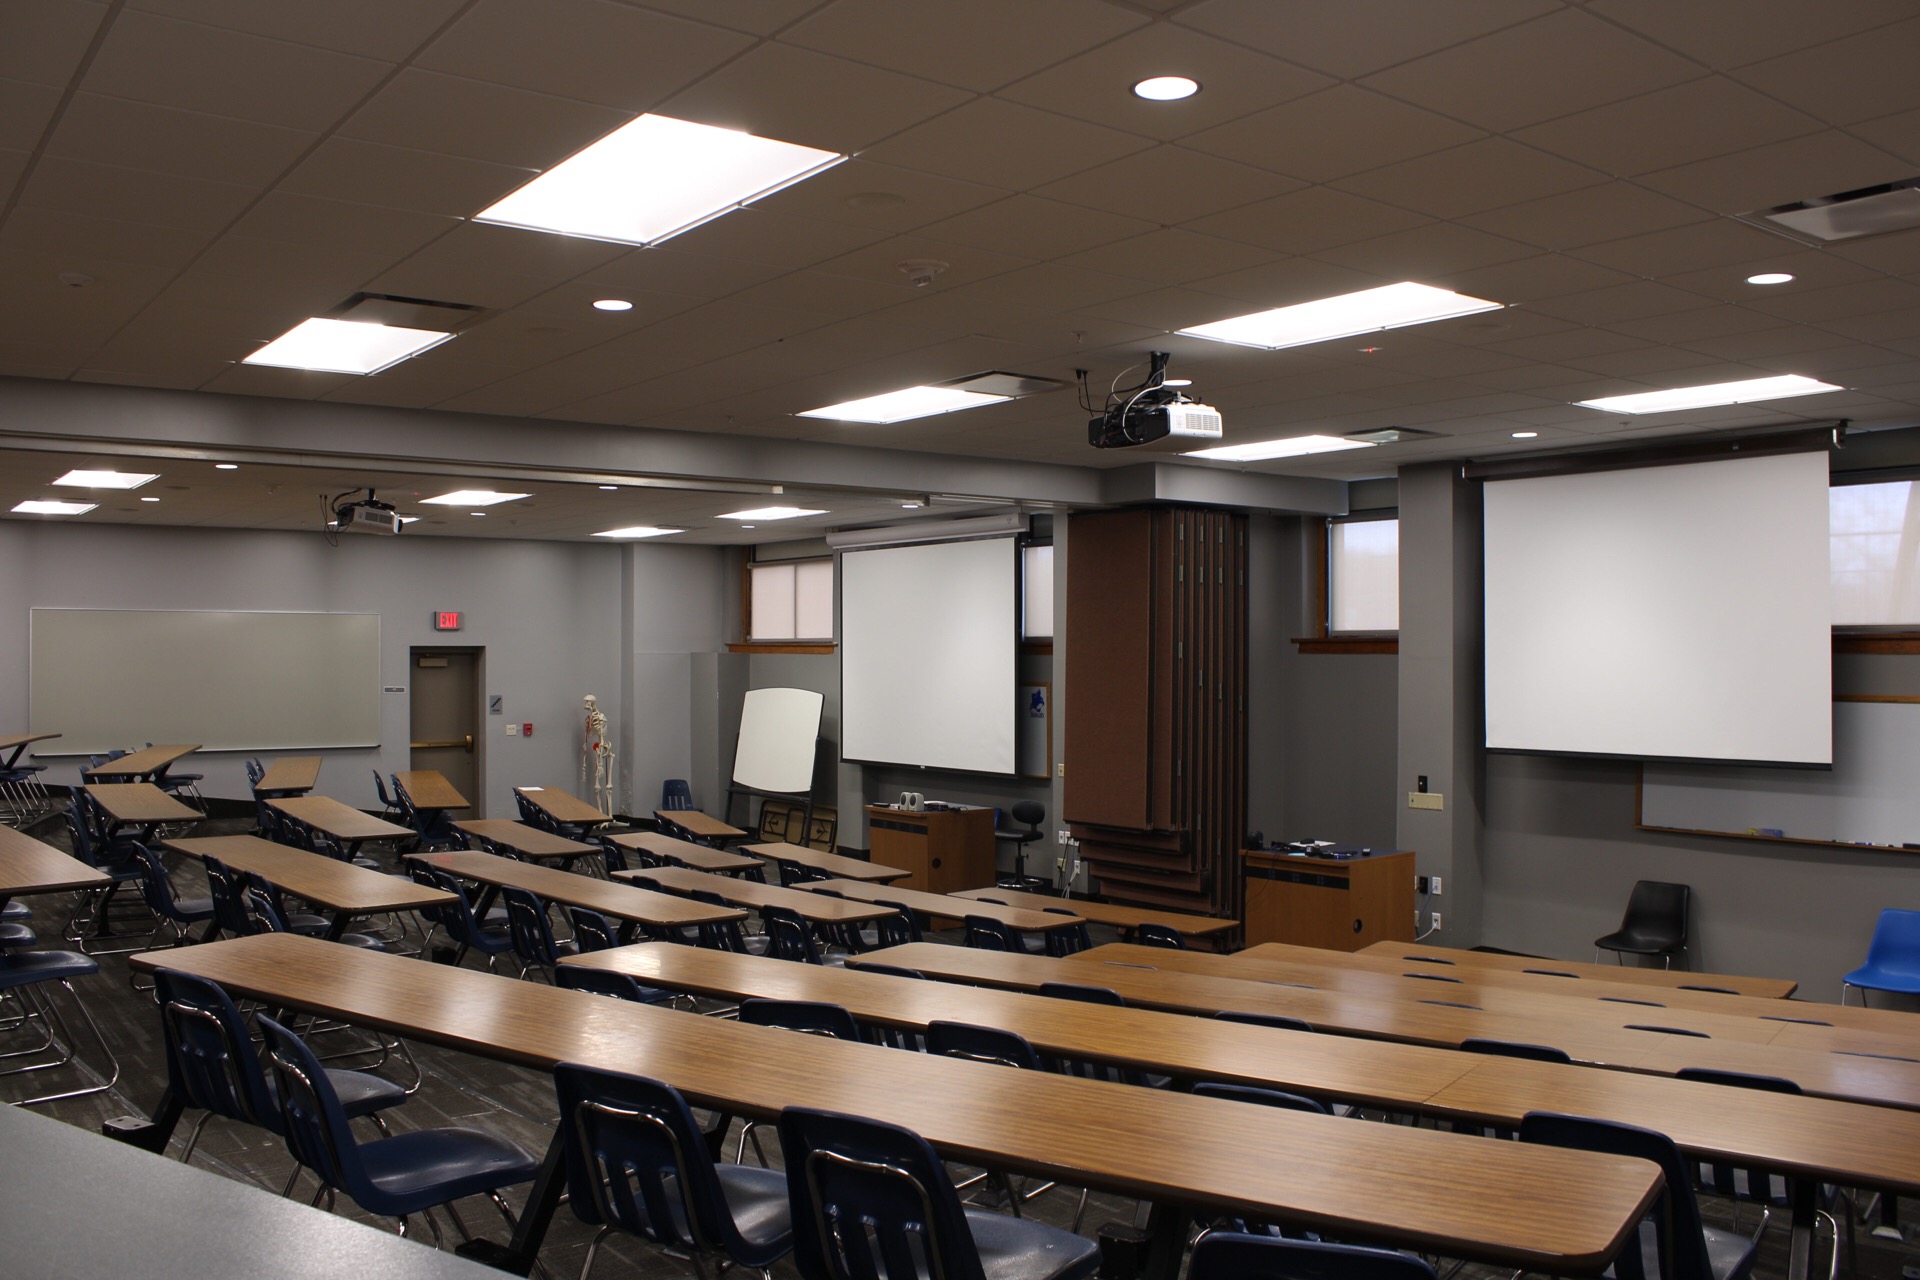 TJ Majors lecture 114 has 2 ceiling mounted projectors, 2 video screens, tables and chairs. The entire room can be split into 2 and the seated space is terraced.